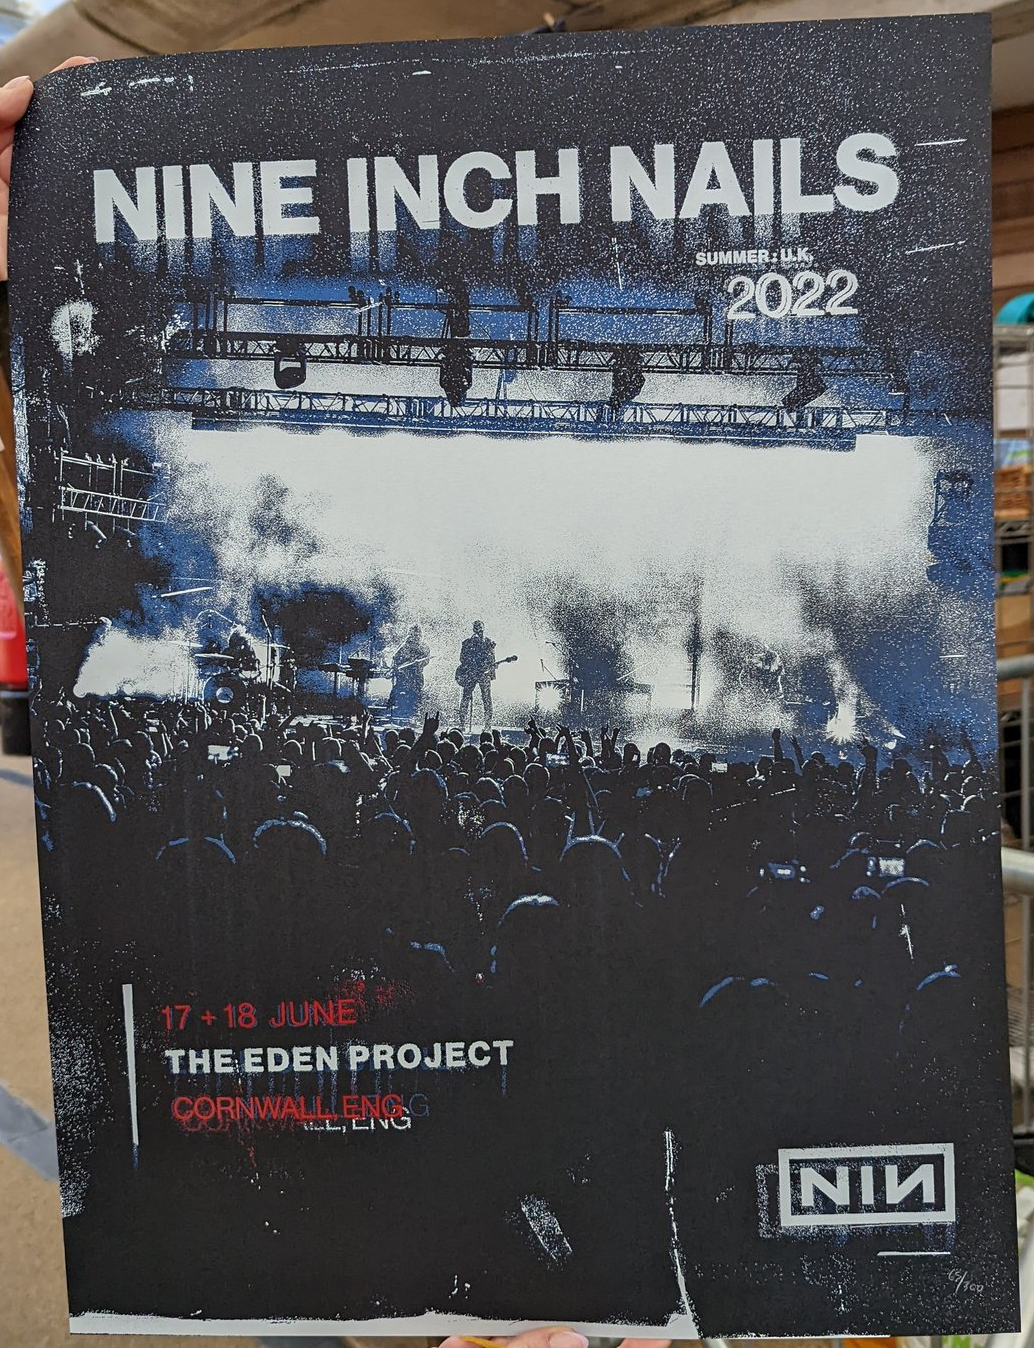 <a href='https://www.ebay.com/sch/i.html?_from=R40&_trksid=p2323012.m570.l1313&_nkw=Nine+Inch+Nails+Poster+Cornwall&_sacat=0&mkcid=1&mkrid=711-53200-19255-0&siteid=0&campid=5336302525&customid=poster&toolid=10001&mkevt=1'>Buy this Poster!</a>